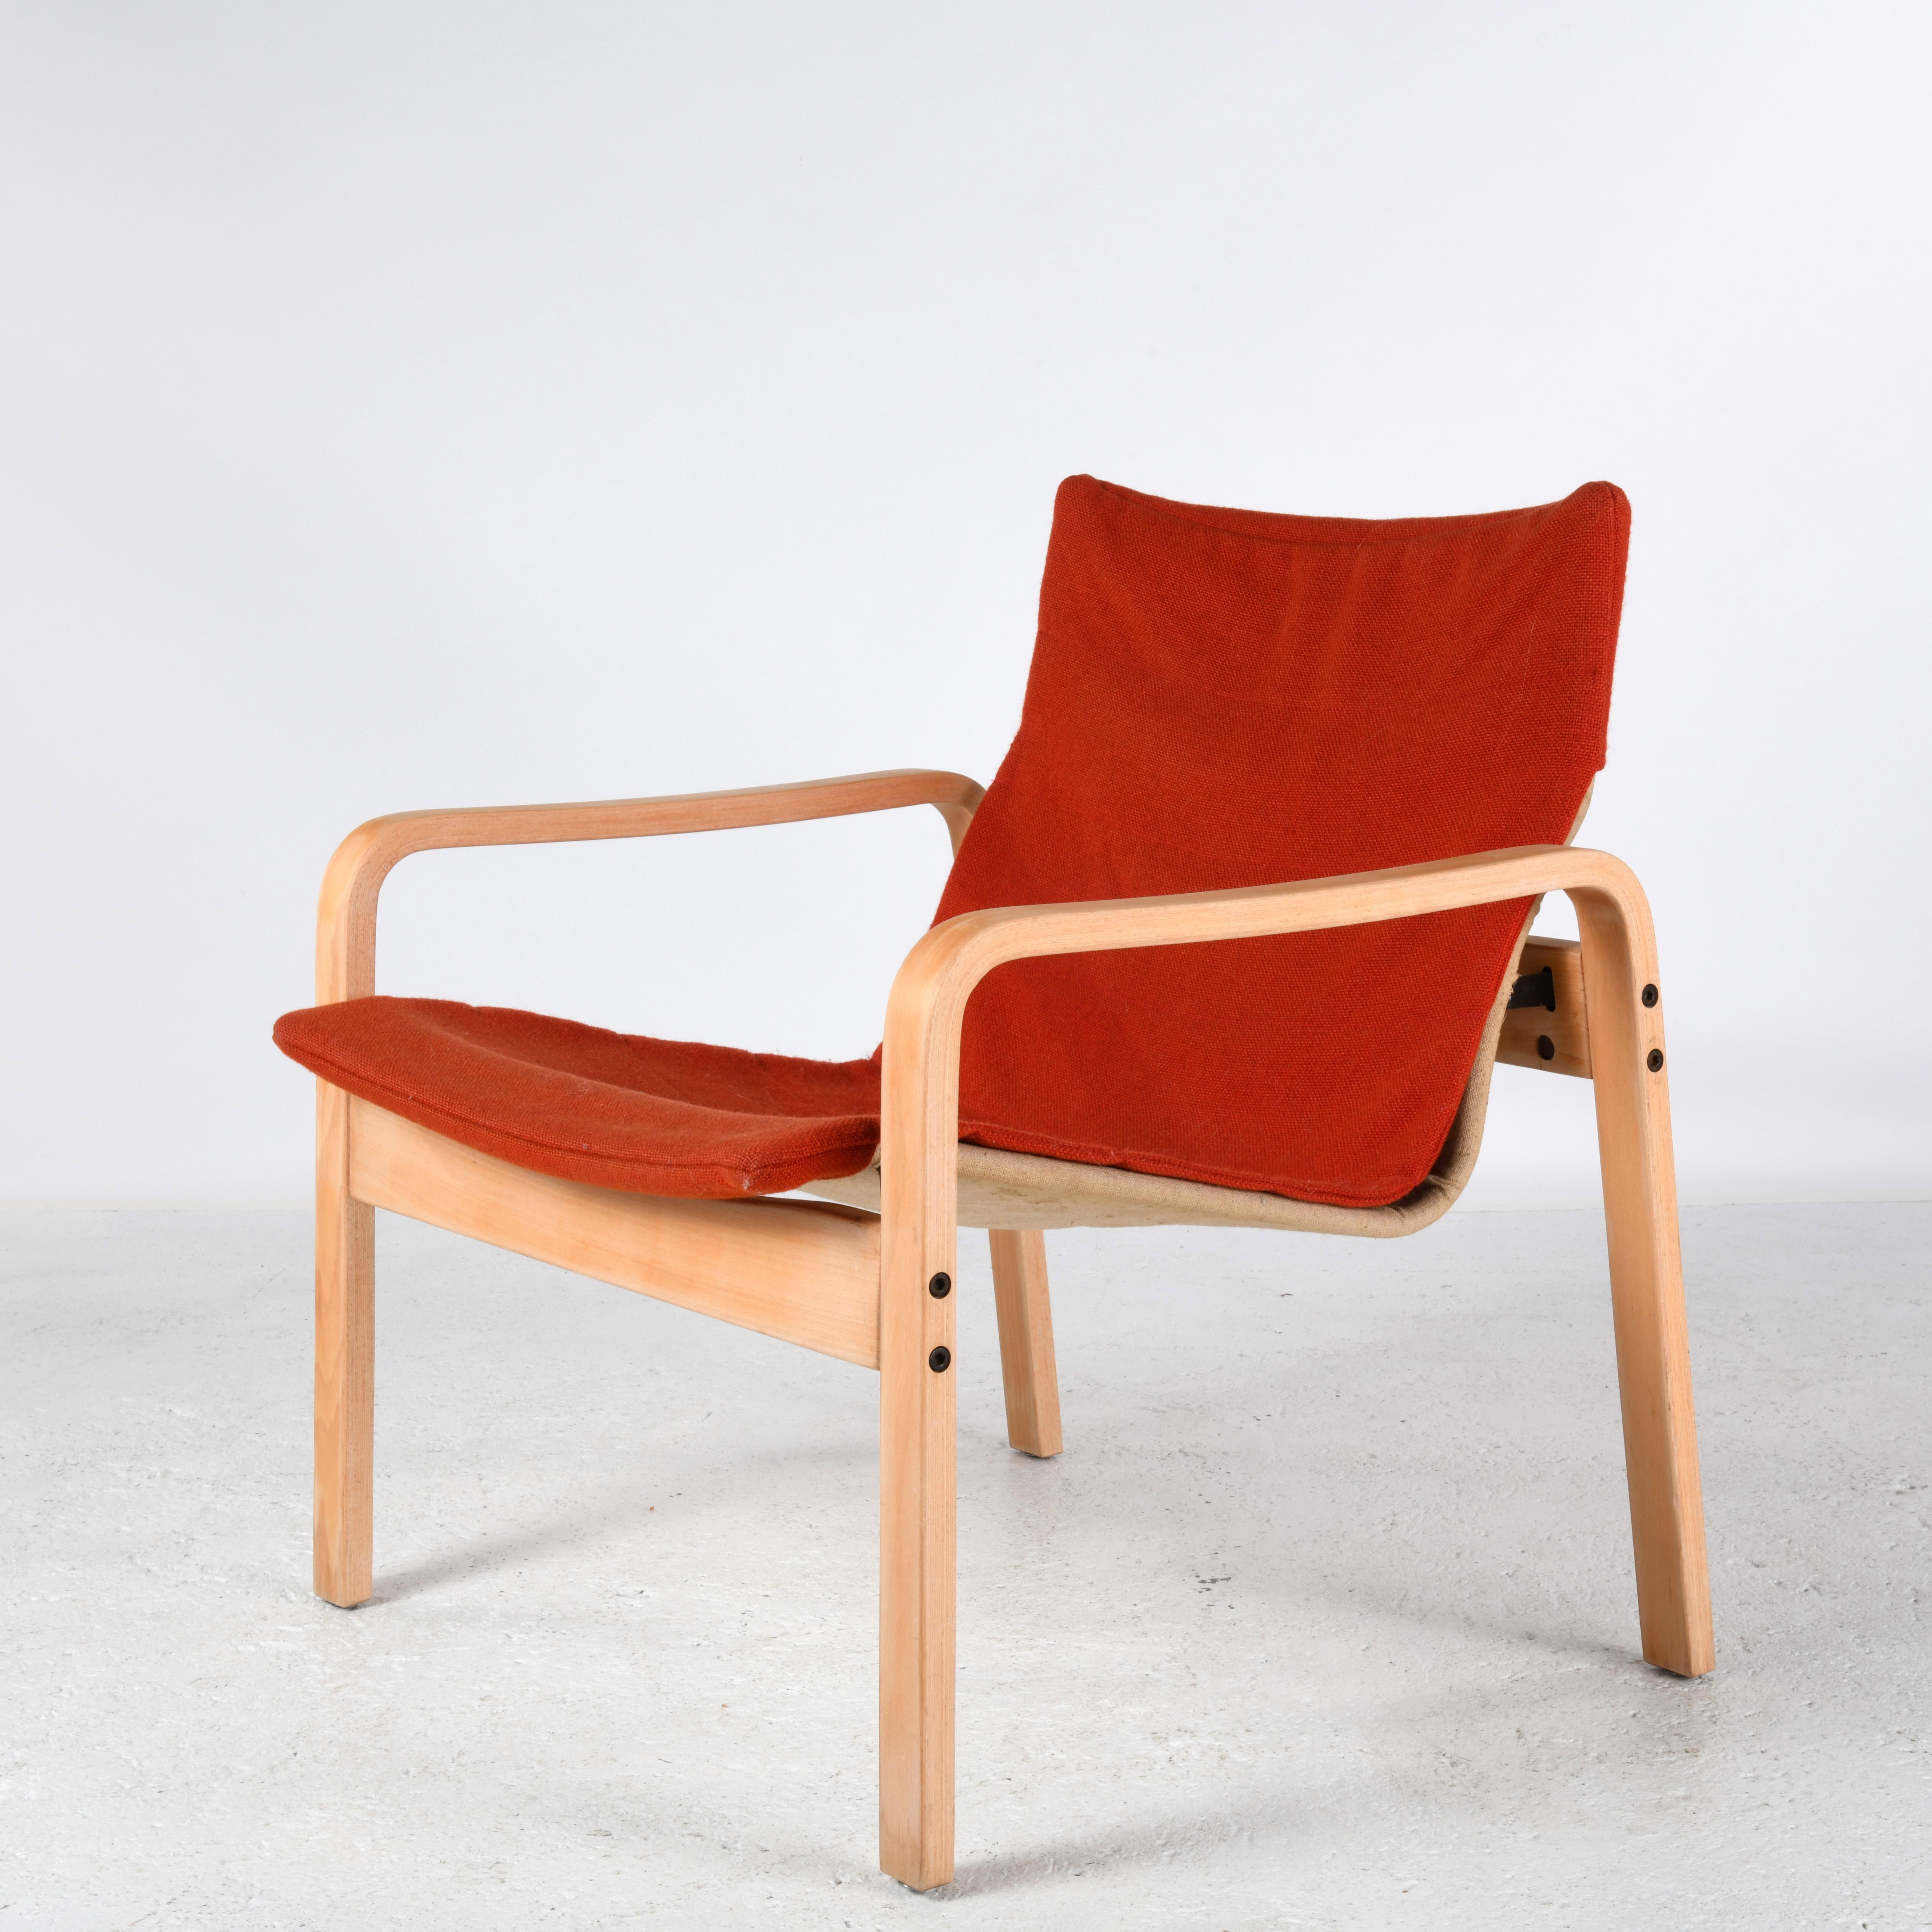 Armchairs in bentwood and textiles from the late 60s. Design in the style of the Dutchman Just Meijer, who worked for the publisher Kembo. Multi-ply bentwood, jute canvas and woollen cloth with removable covers, so the red fabric is easy to wash.